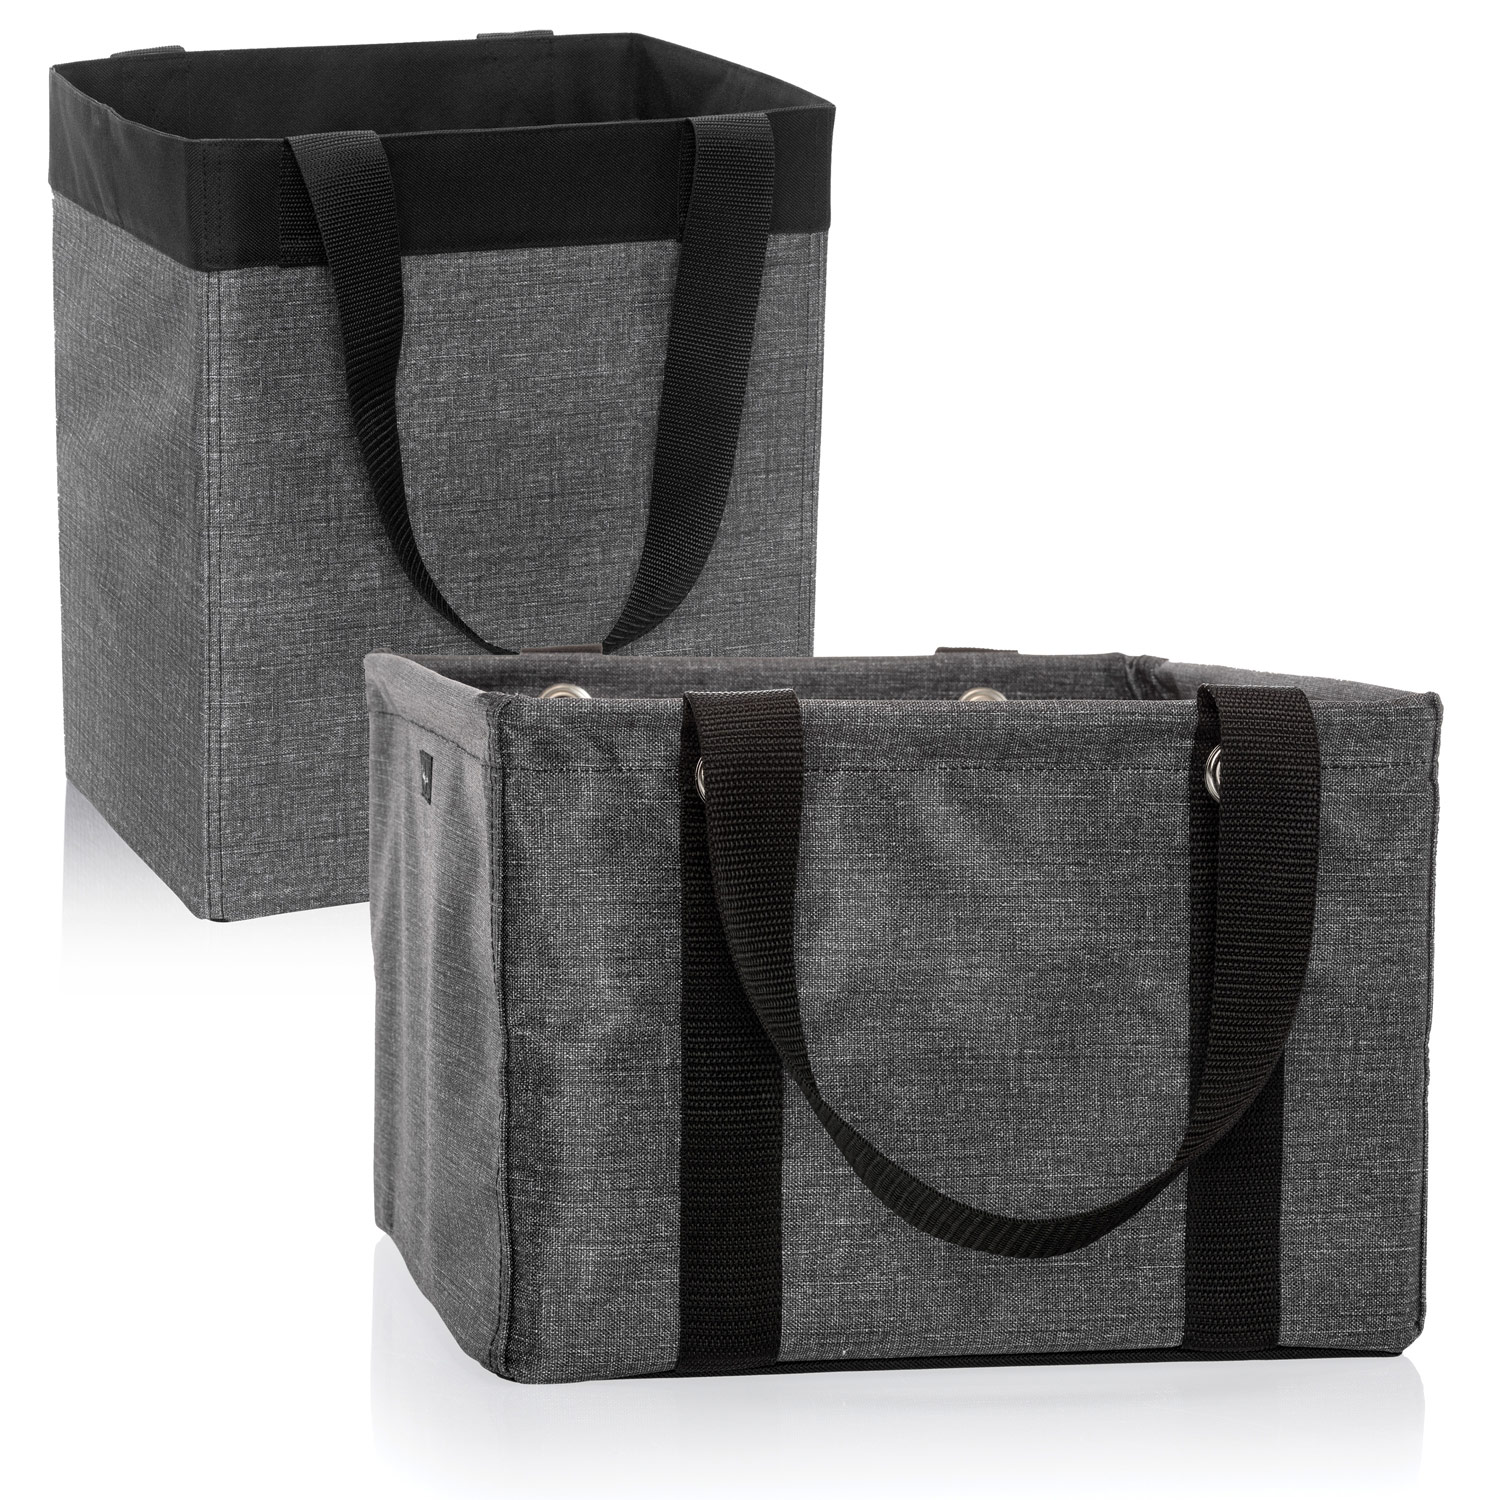 Charcoal Crosshatch - Deluxe Utility Tote - Thirty-One Gifts - Affordable  Purses, Totes & Bags